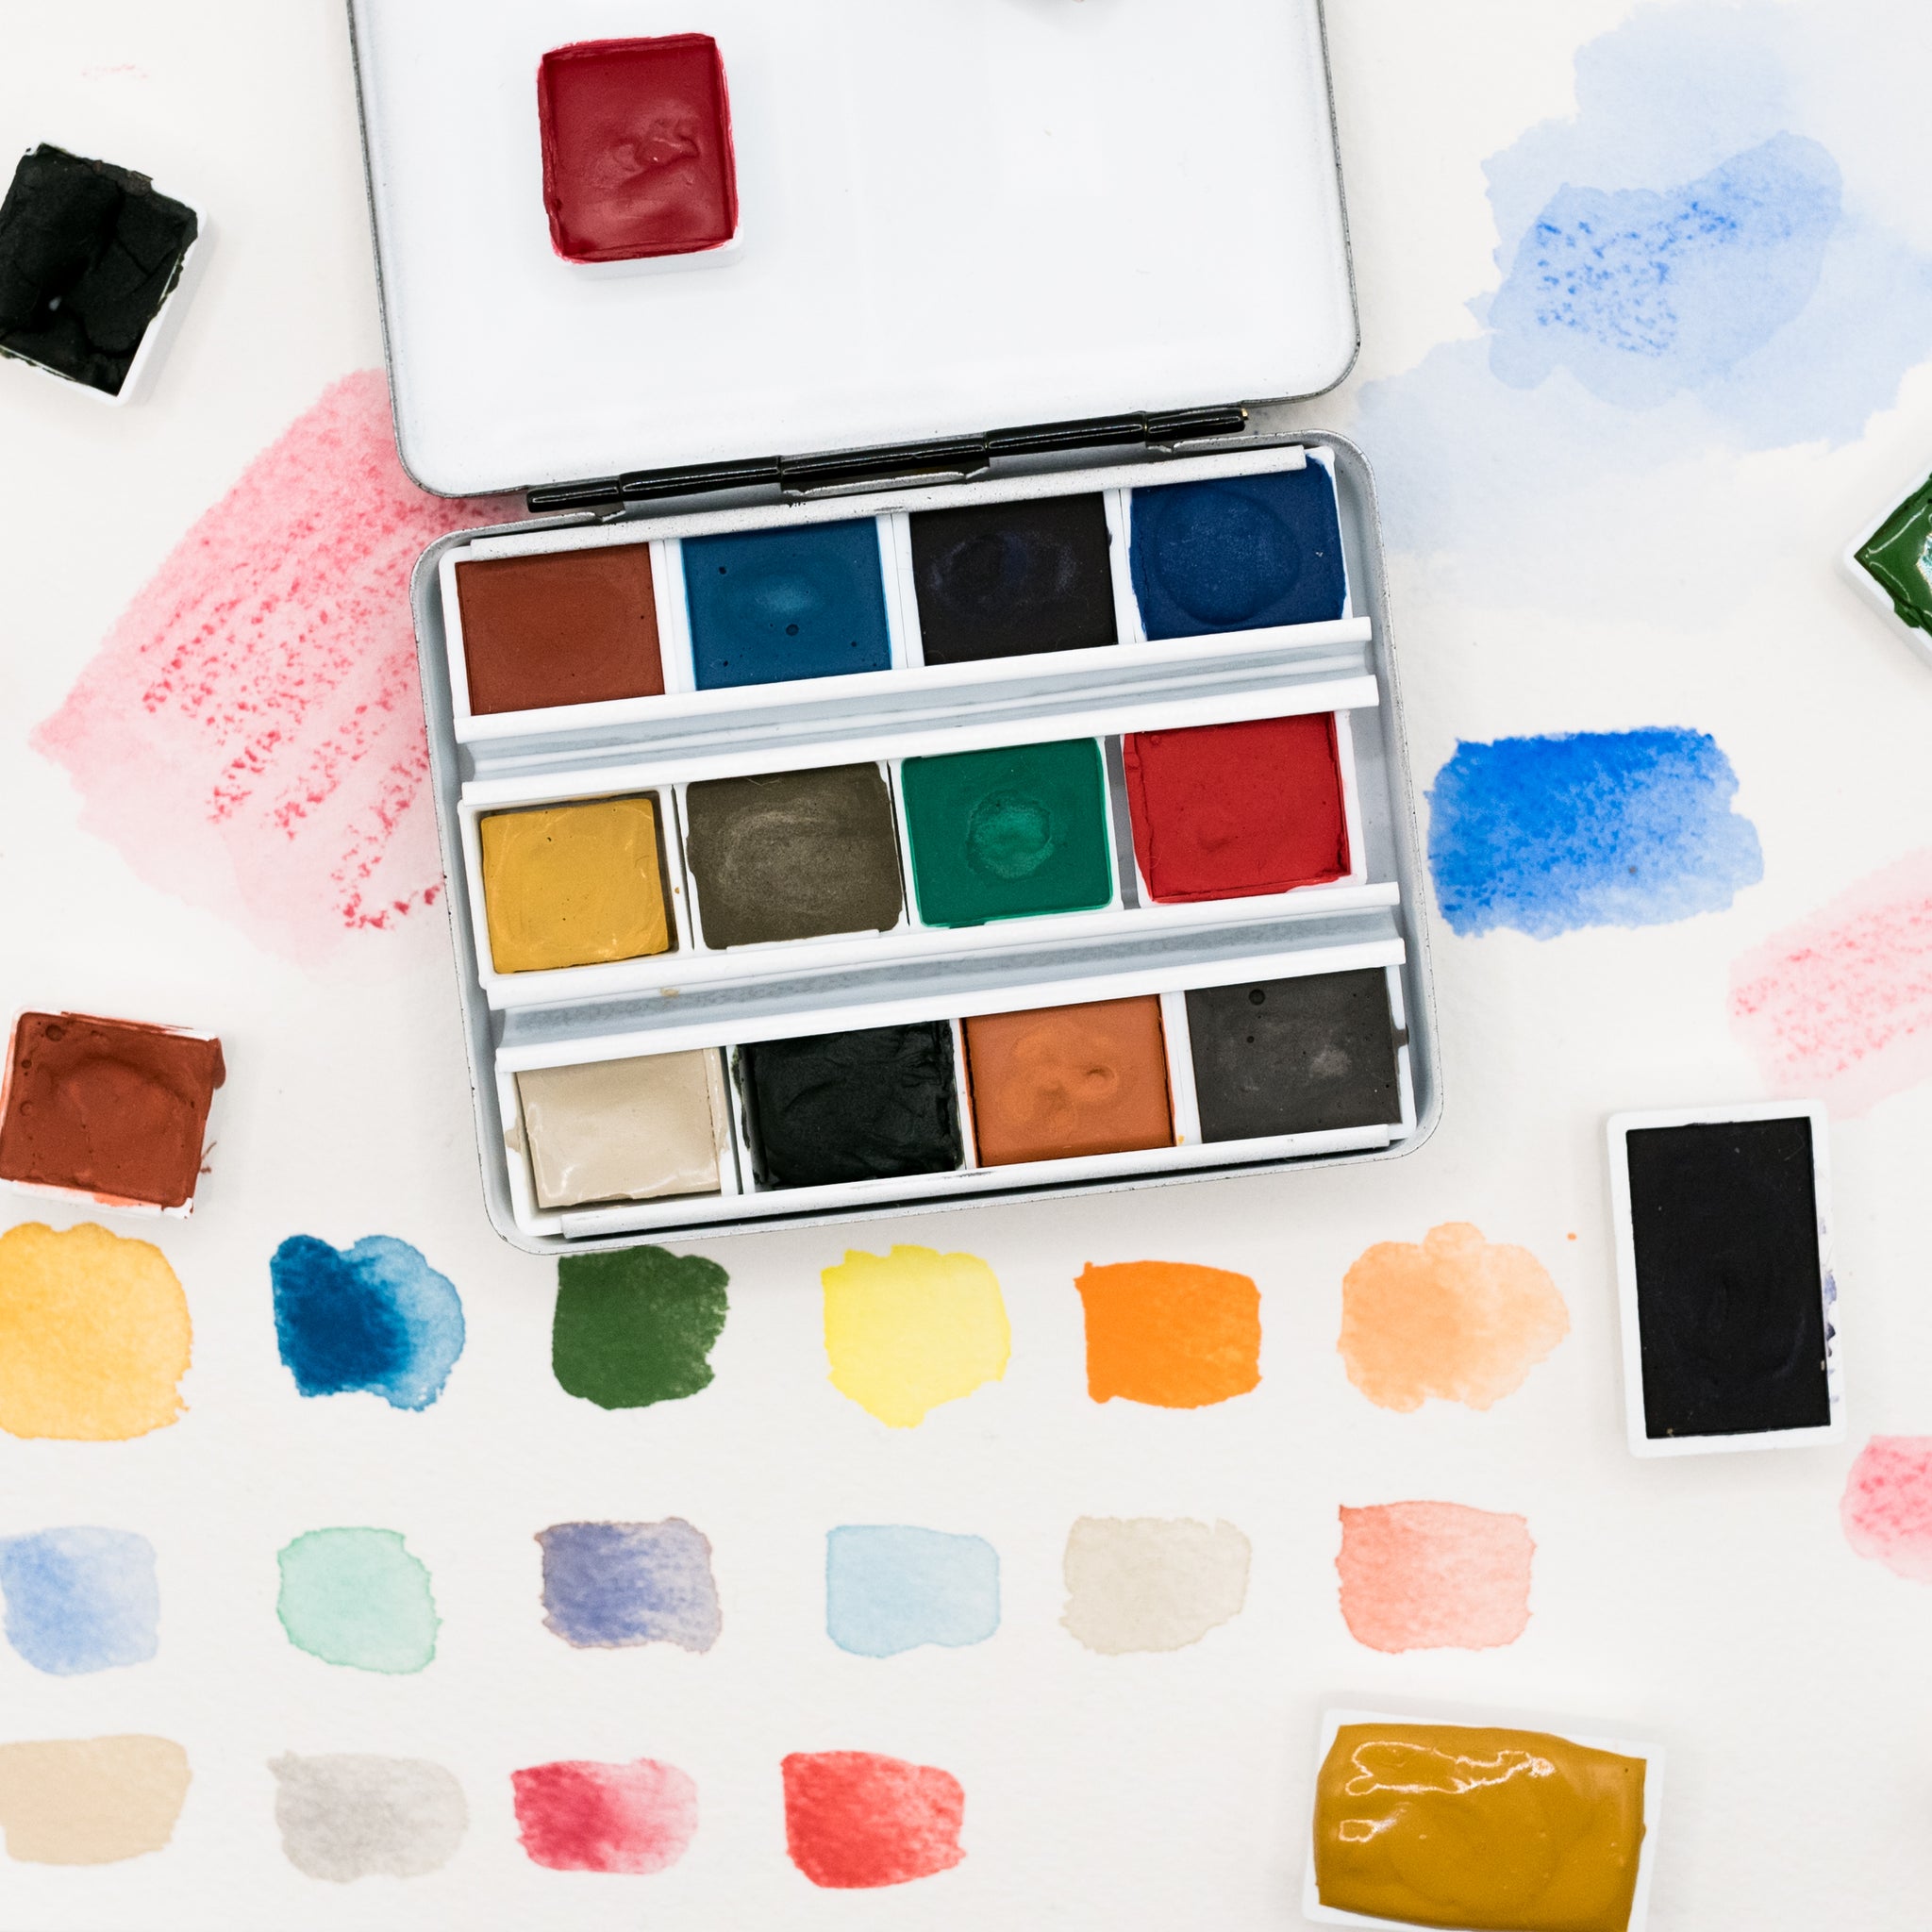 Making Watercolors: An Intro To Paintmaking